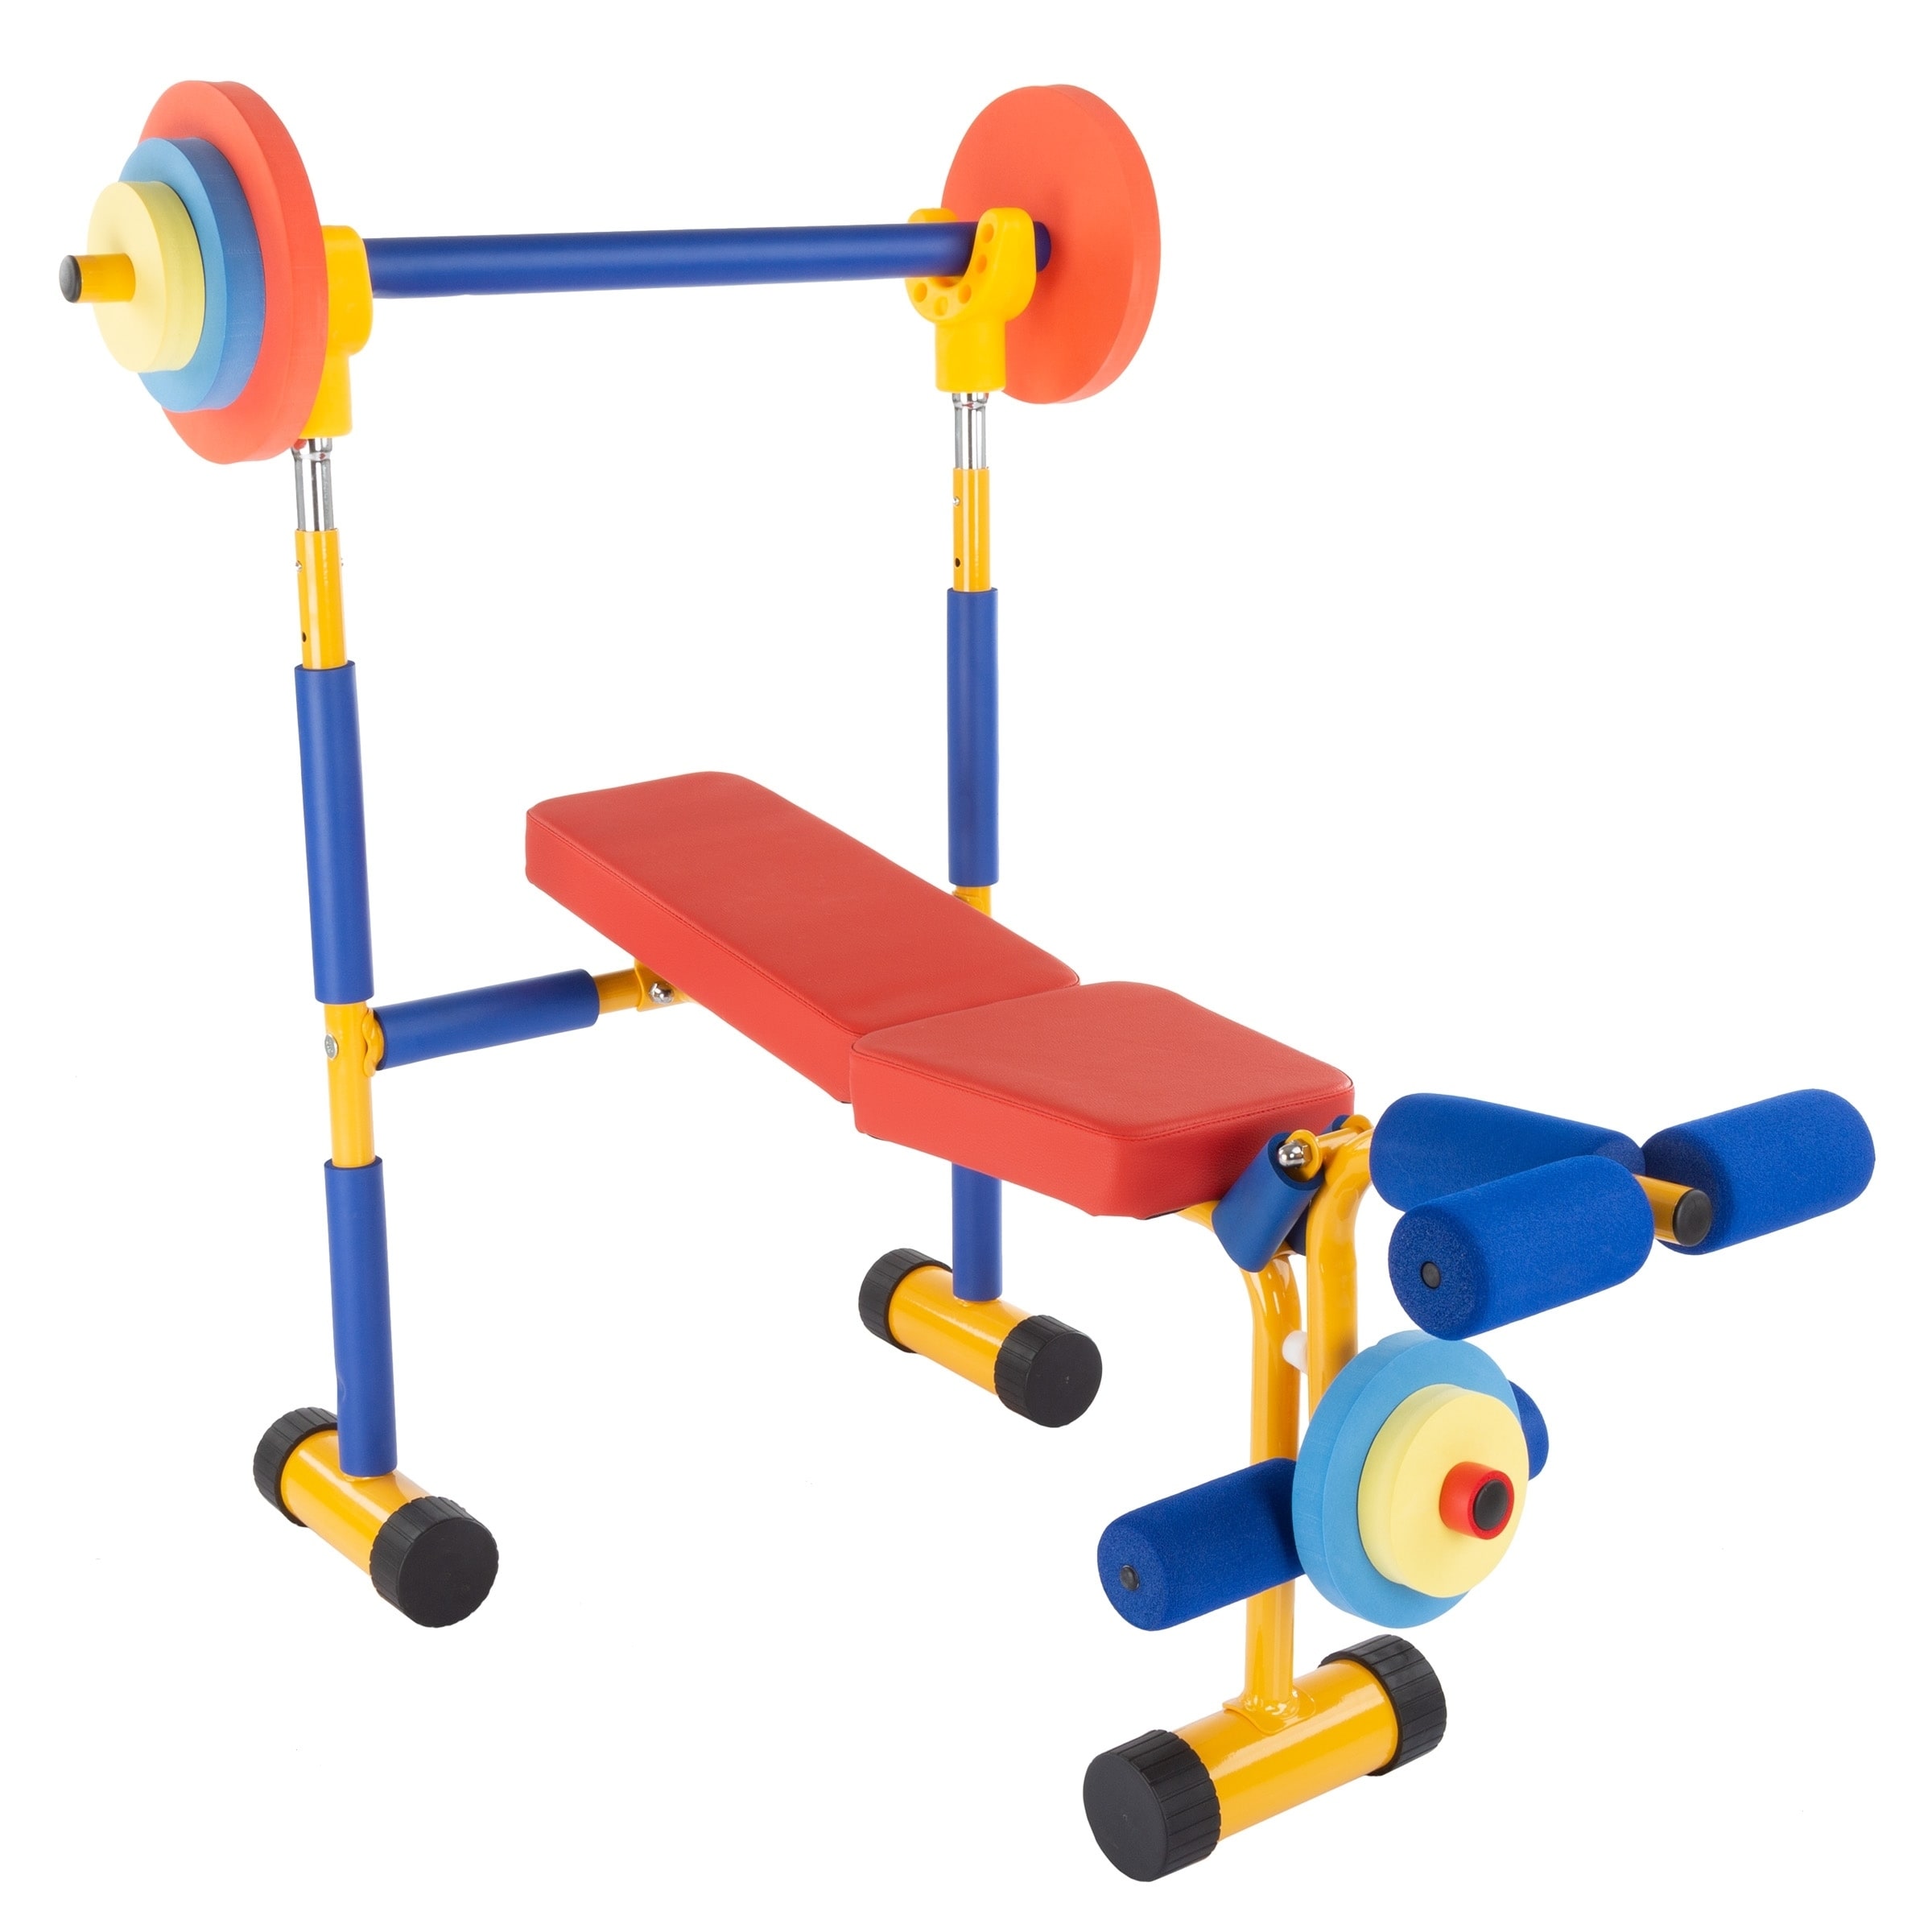 Toy Bench and Leg Press Childrens Play Workout Equipment by Hey! Play!